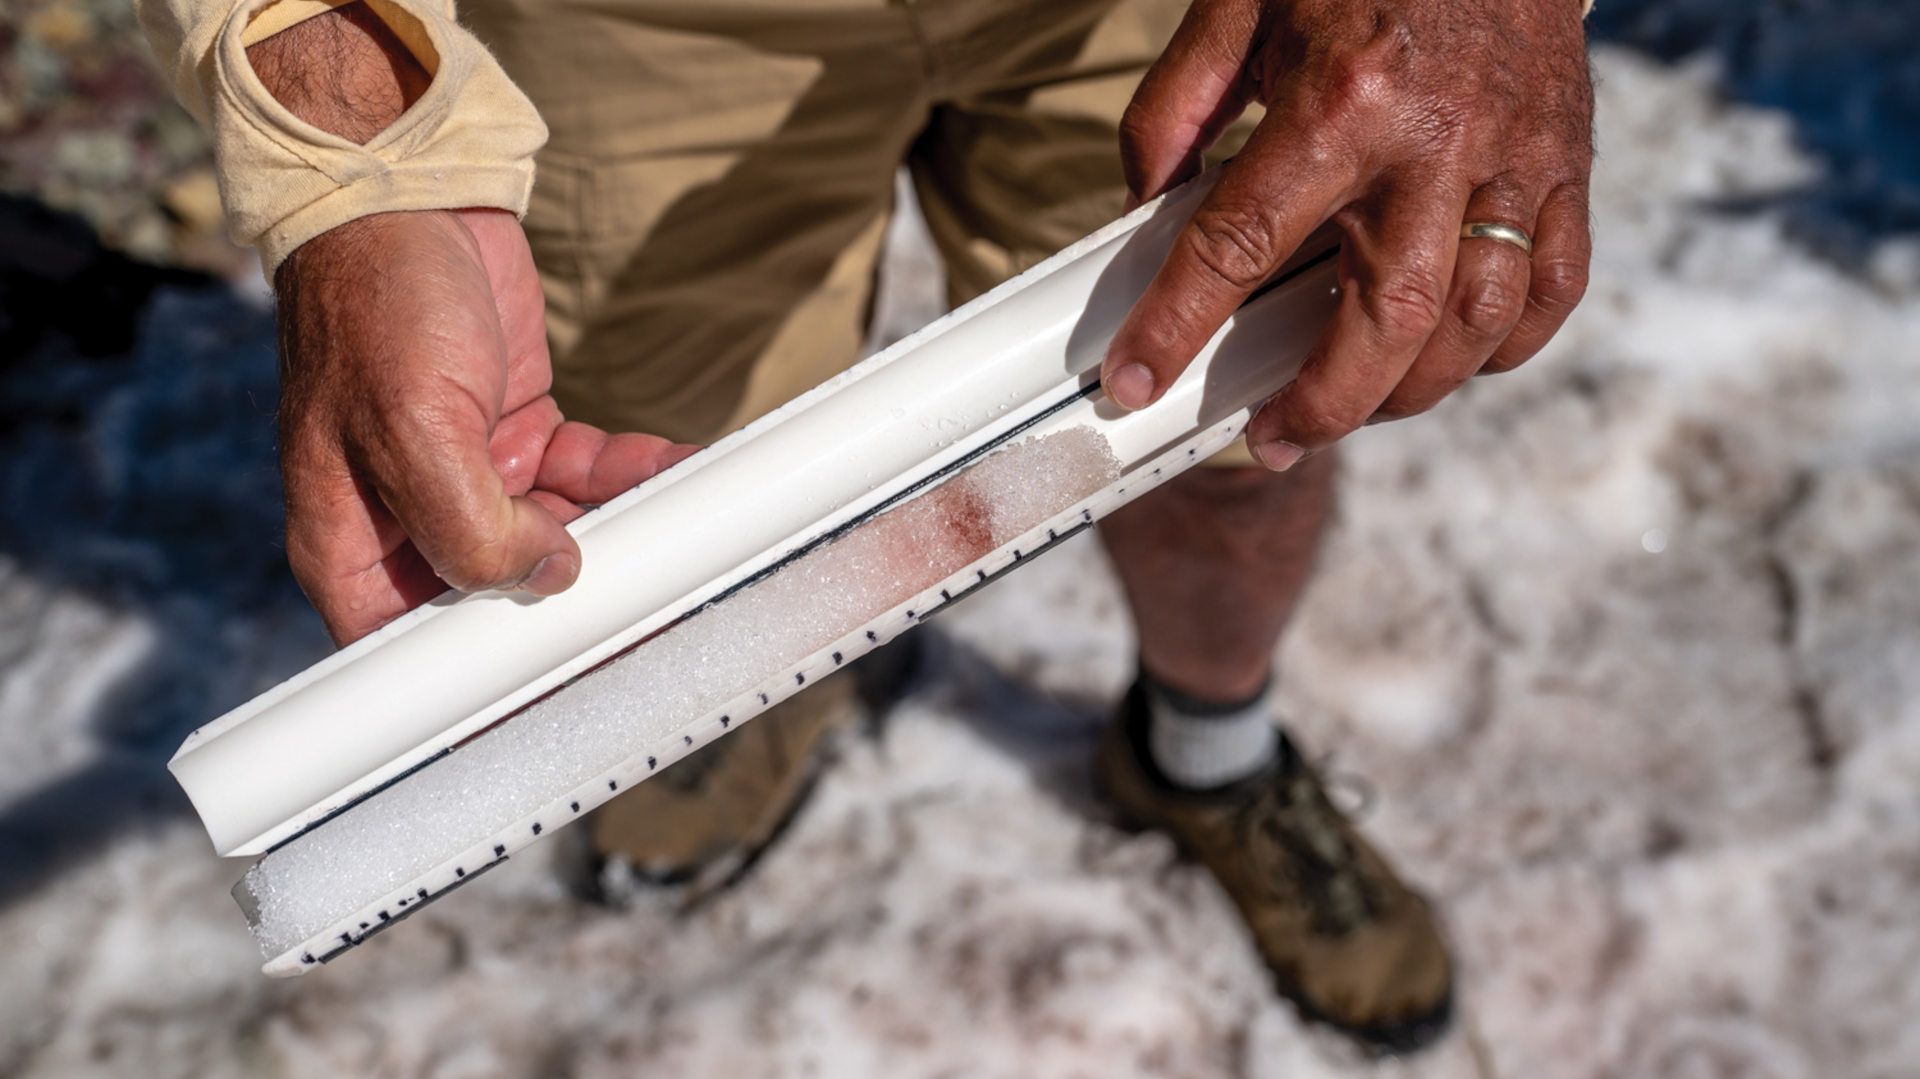 Ecologist Jim Elser examines bands of snow algae found in a snow core sample.